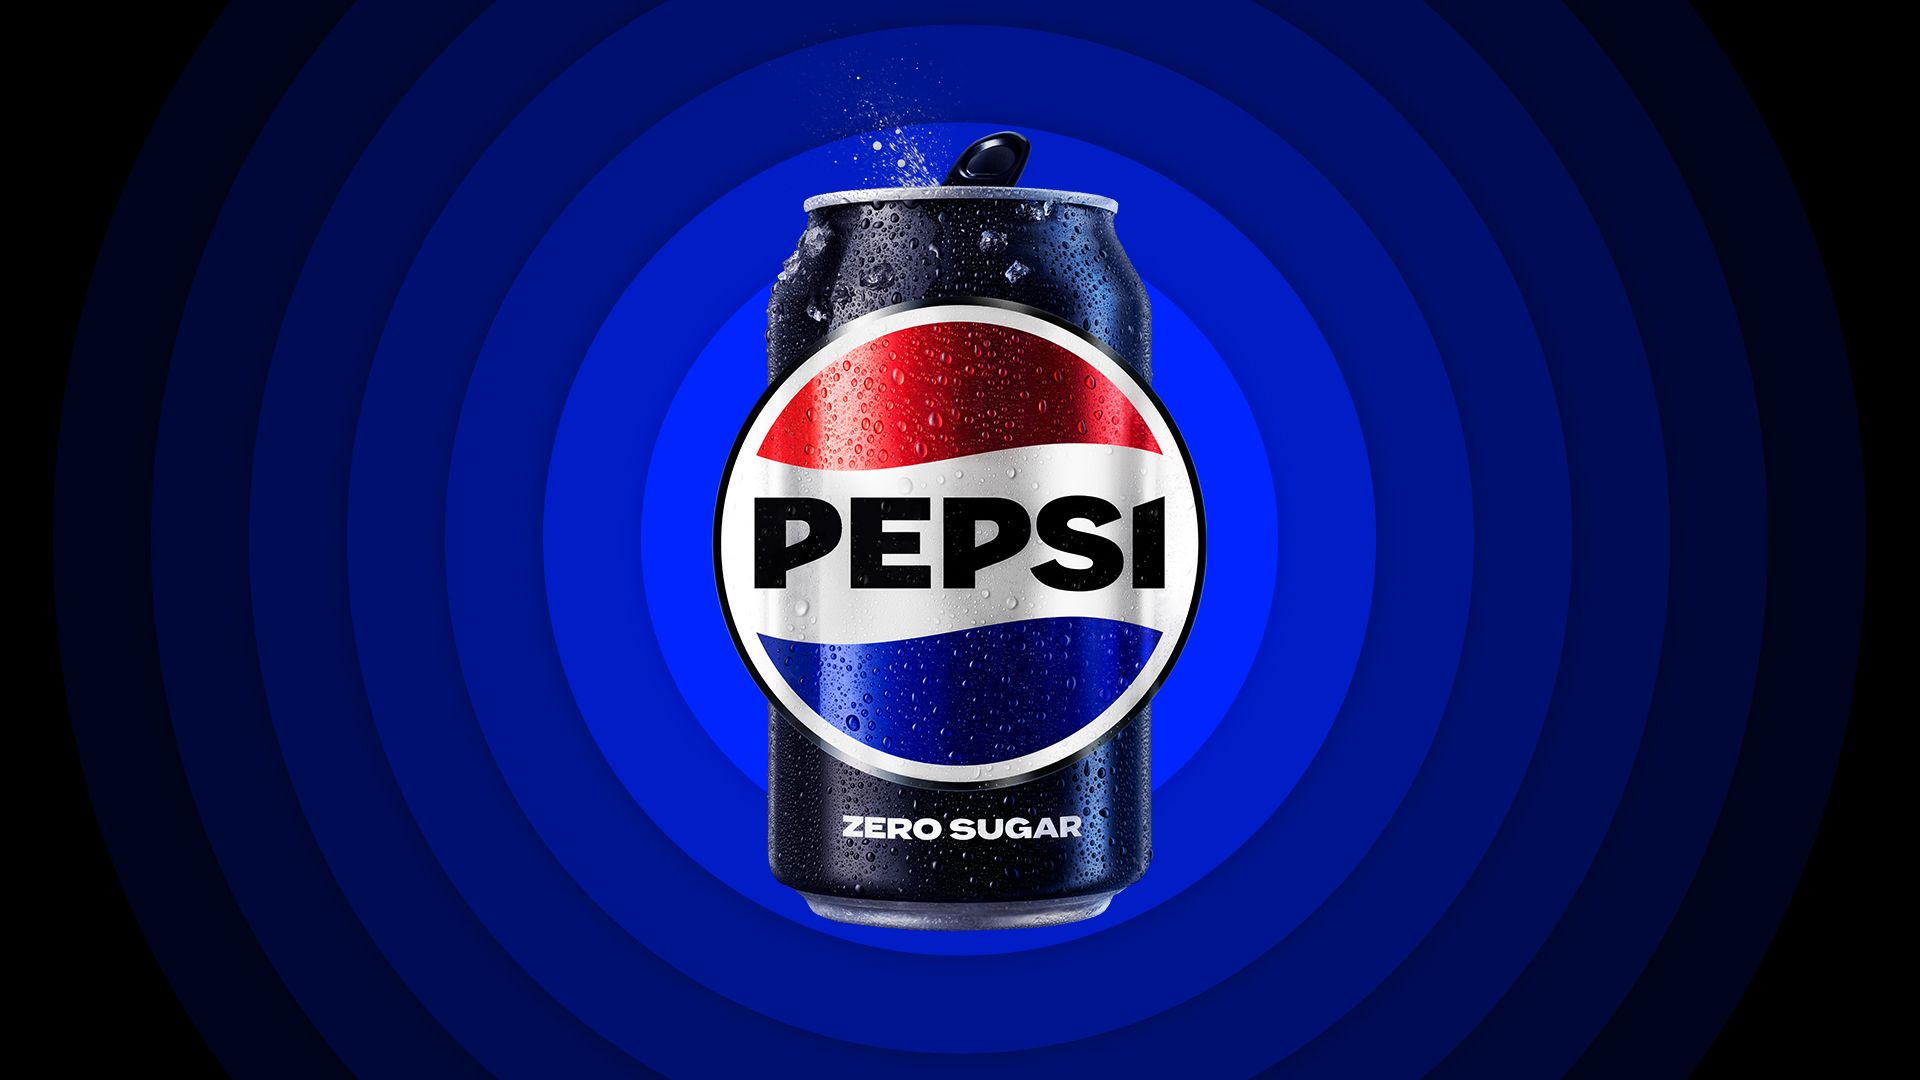 Mark the new era of PEPSI - Logo and Investment. - AXEHEDGE